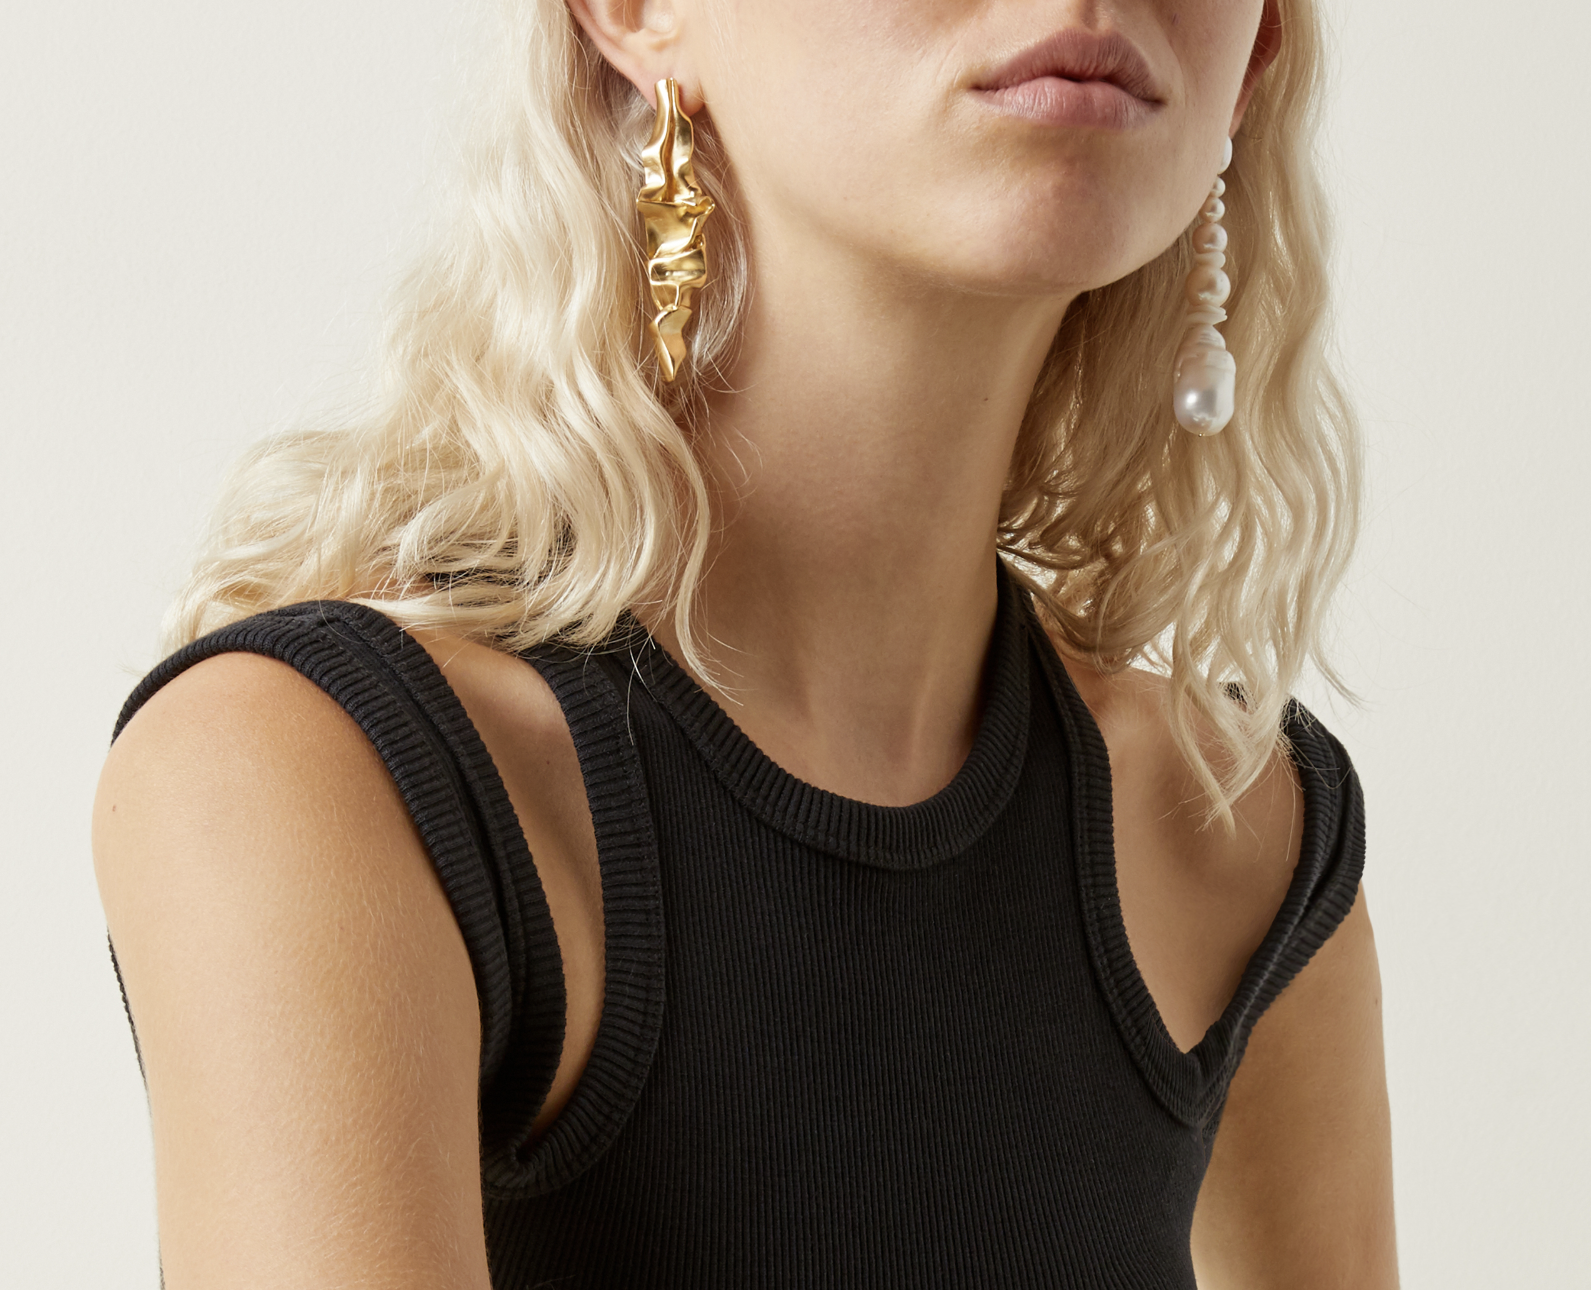 five-of-the-jazziest-earrings-for-any-outfit-elevation